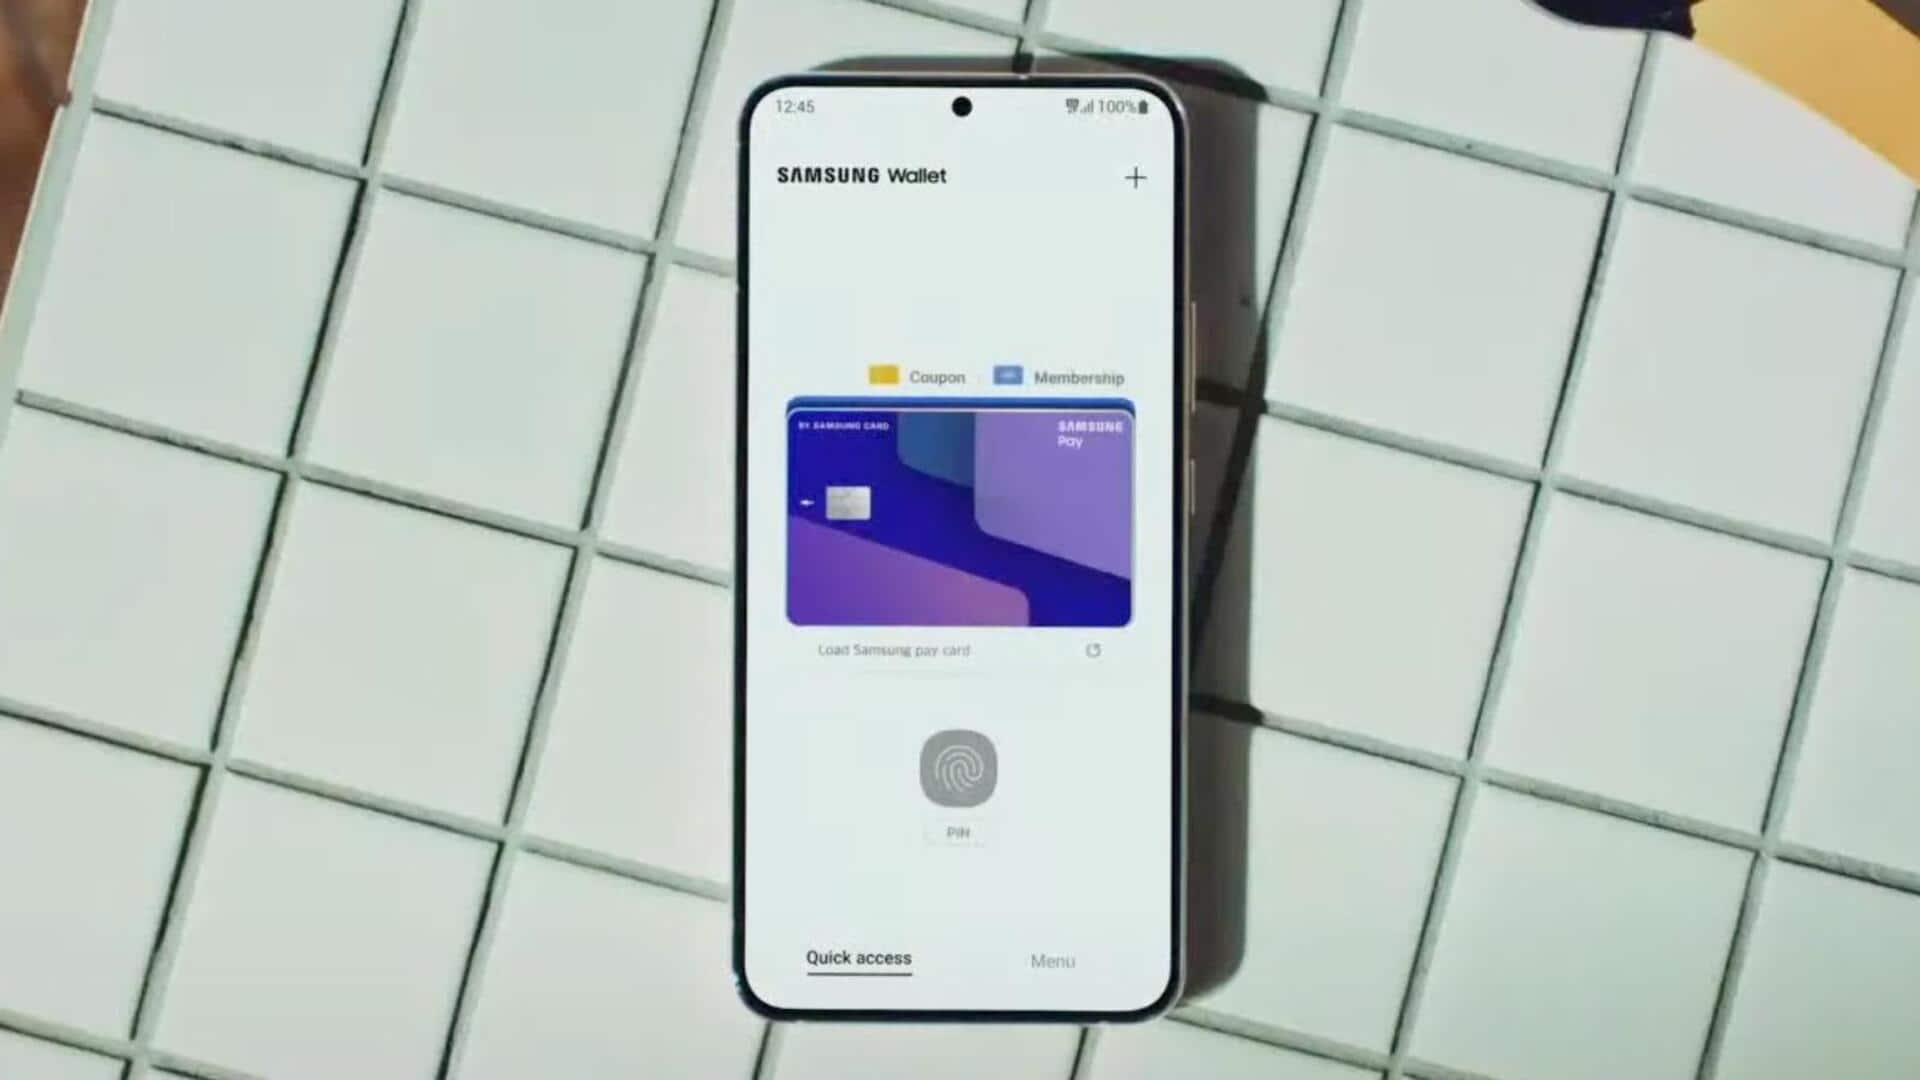 Samsung partners with Paytm to upgrade wallet services in India